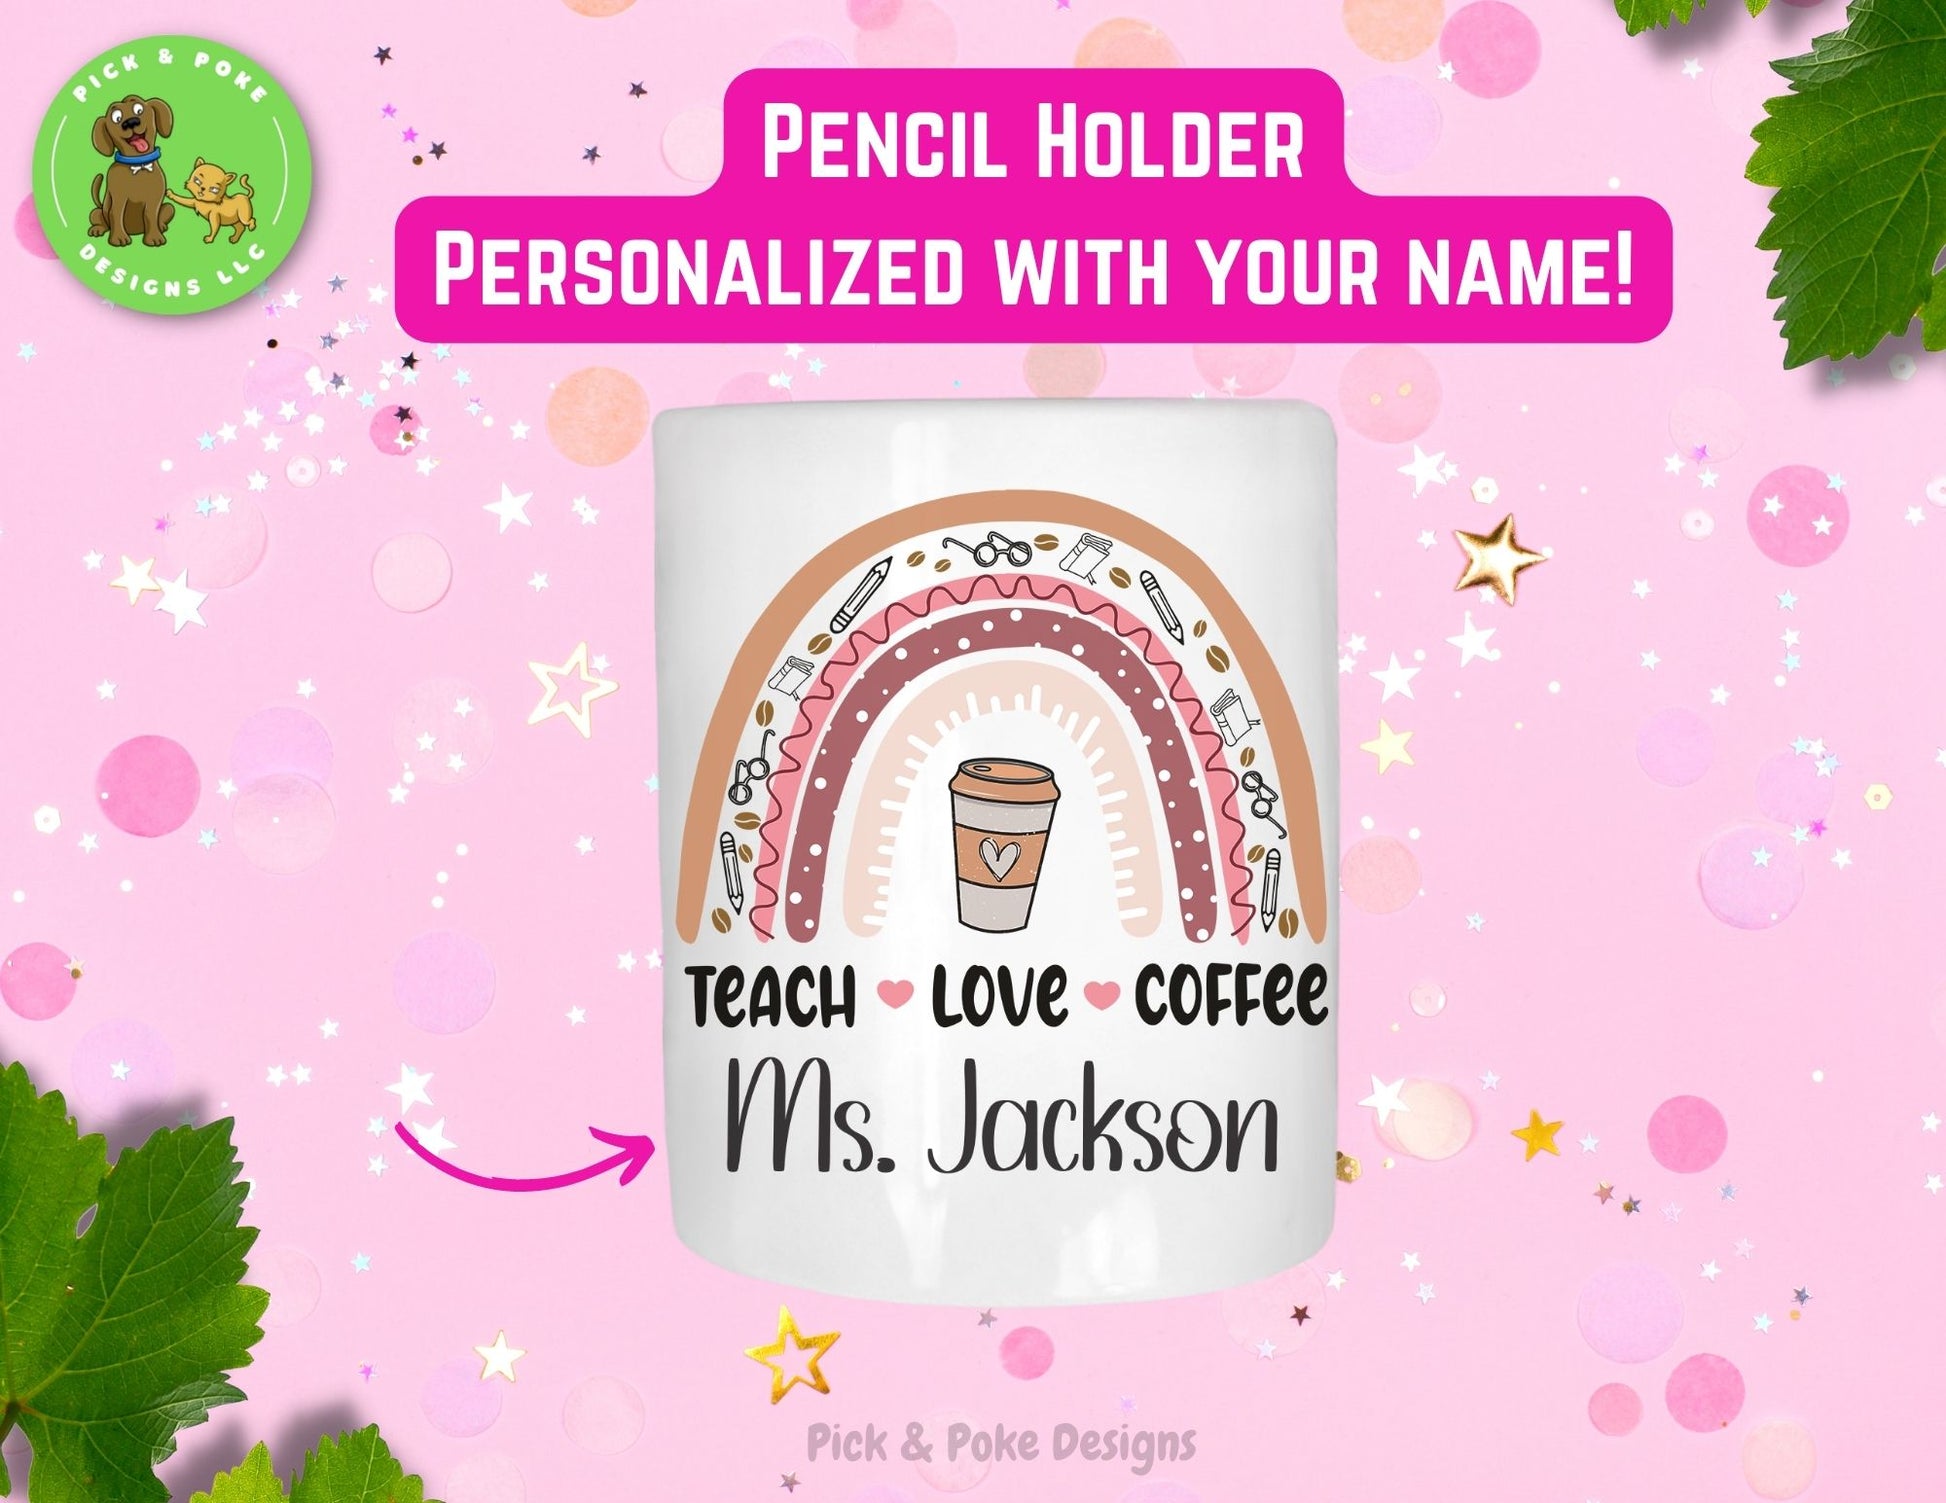 Personalized teach love coffee ceramic pencil holder is personalized with your name written in a hand lettering font